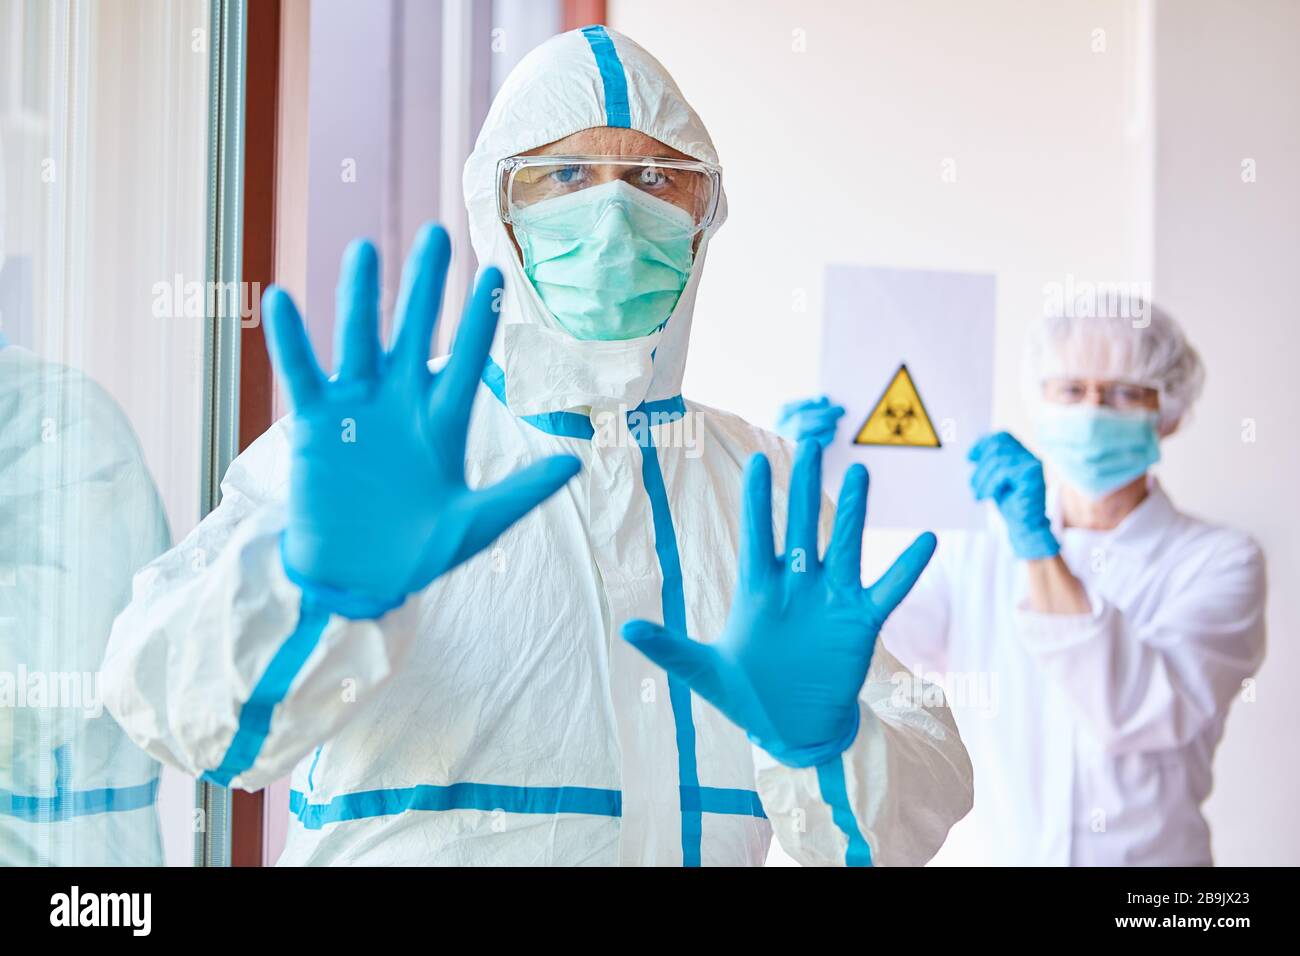 Doctors in protective clothing enforce ban on visits to clinic because of Covid-19 epidemic Stock Photo